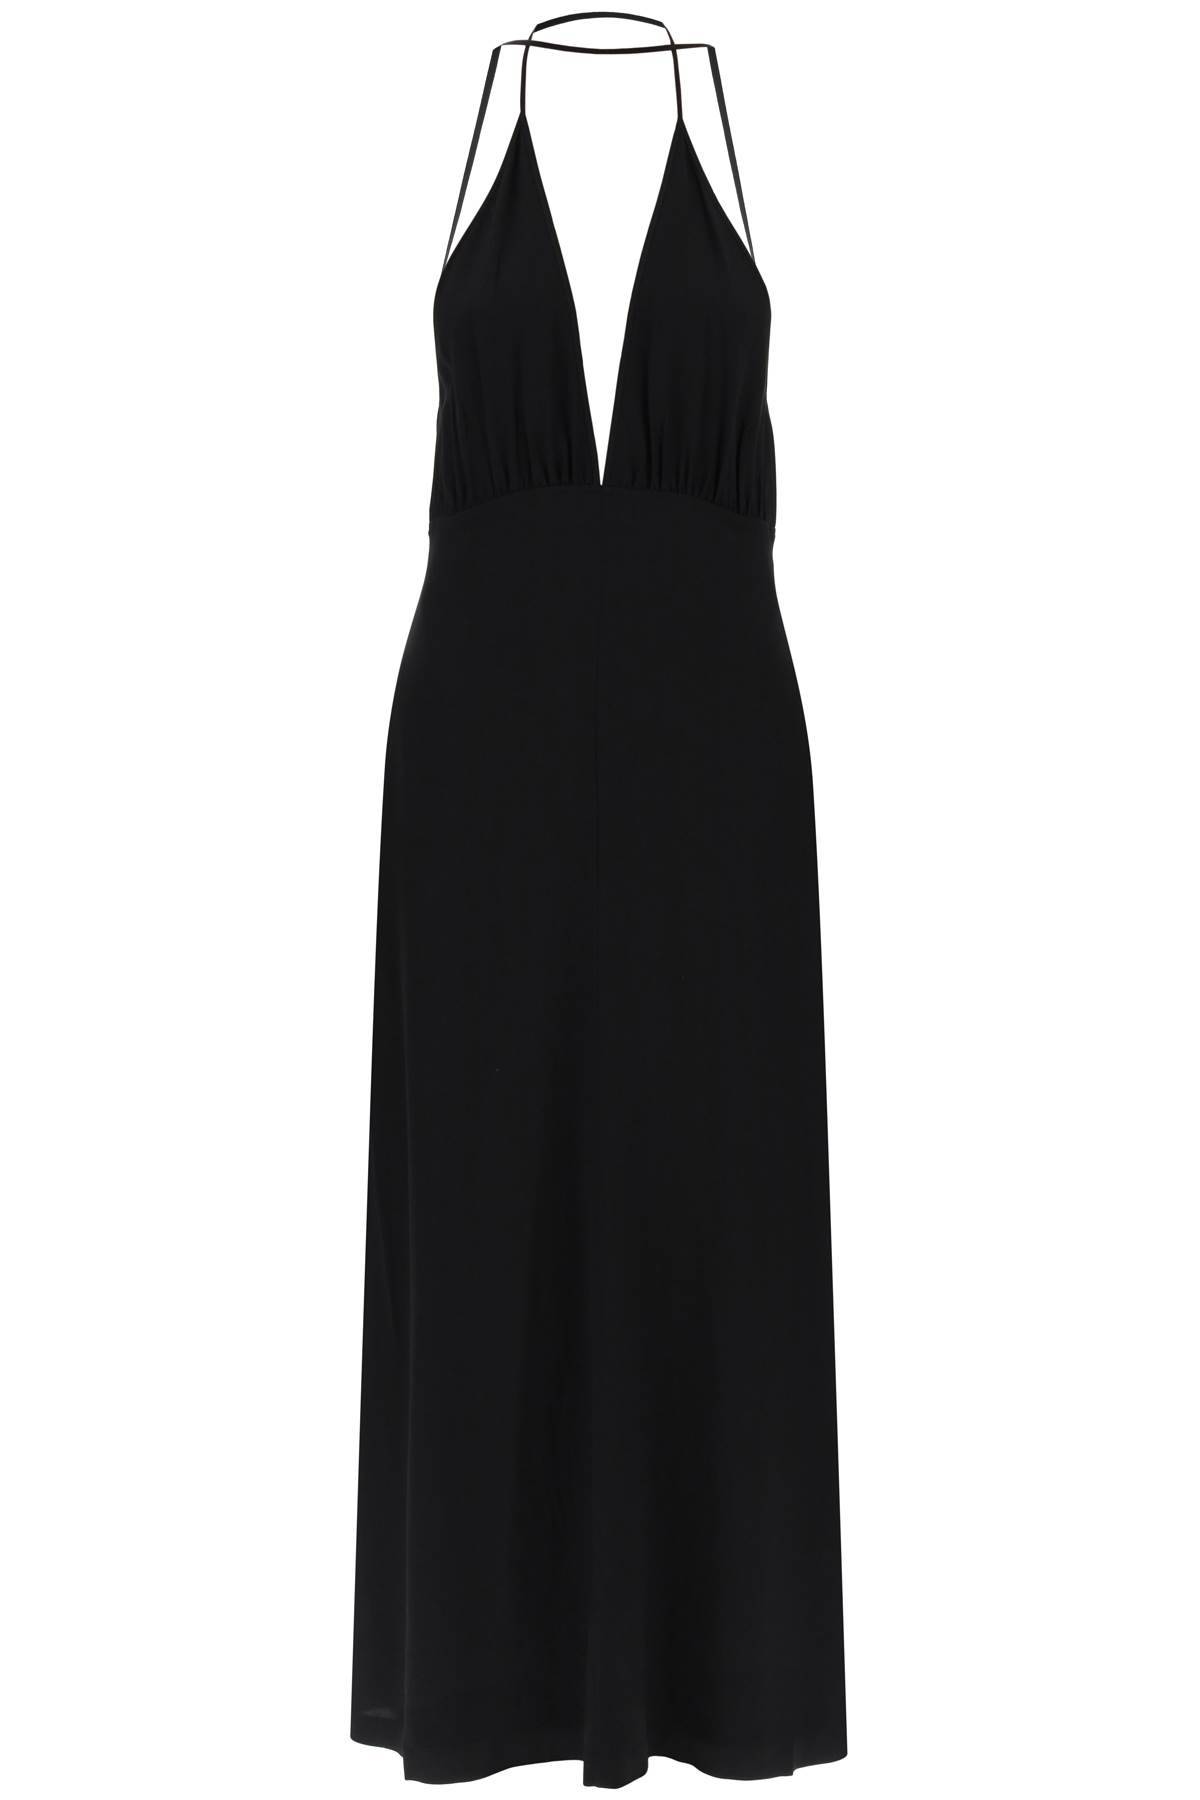 Toteme TOTEME silk dress with double halter neckline